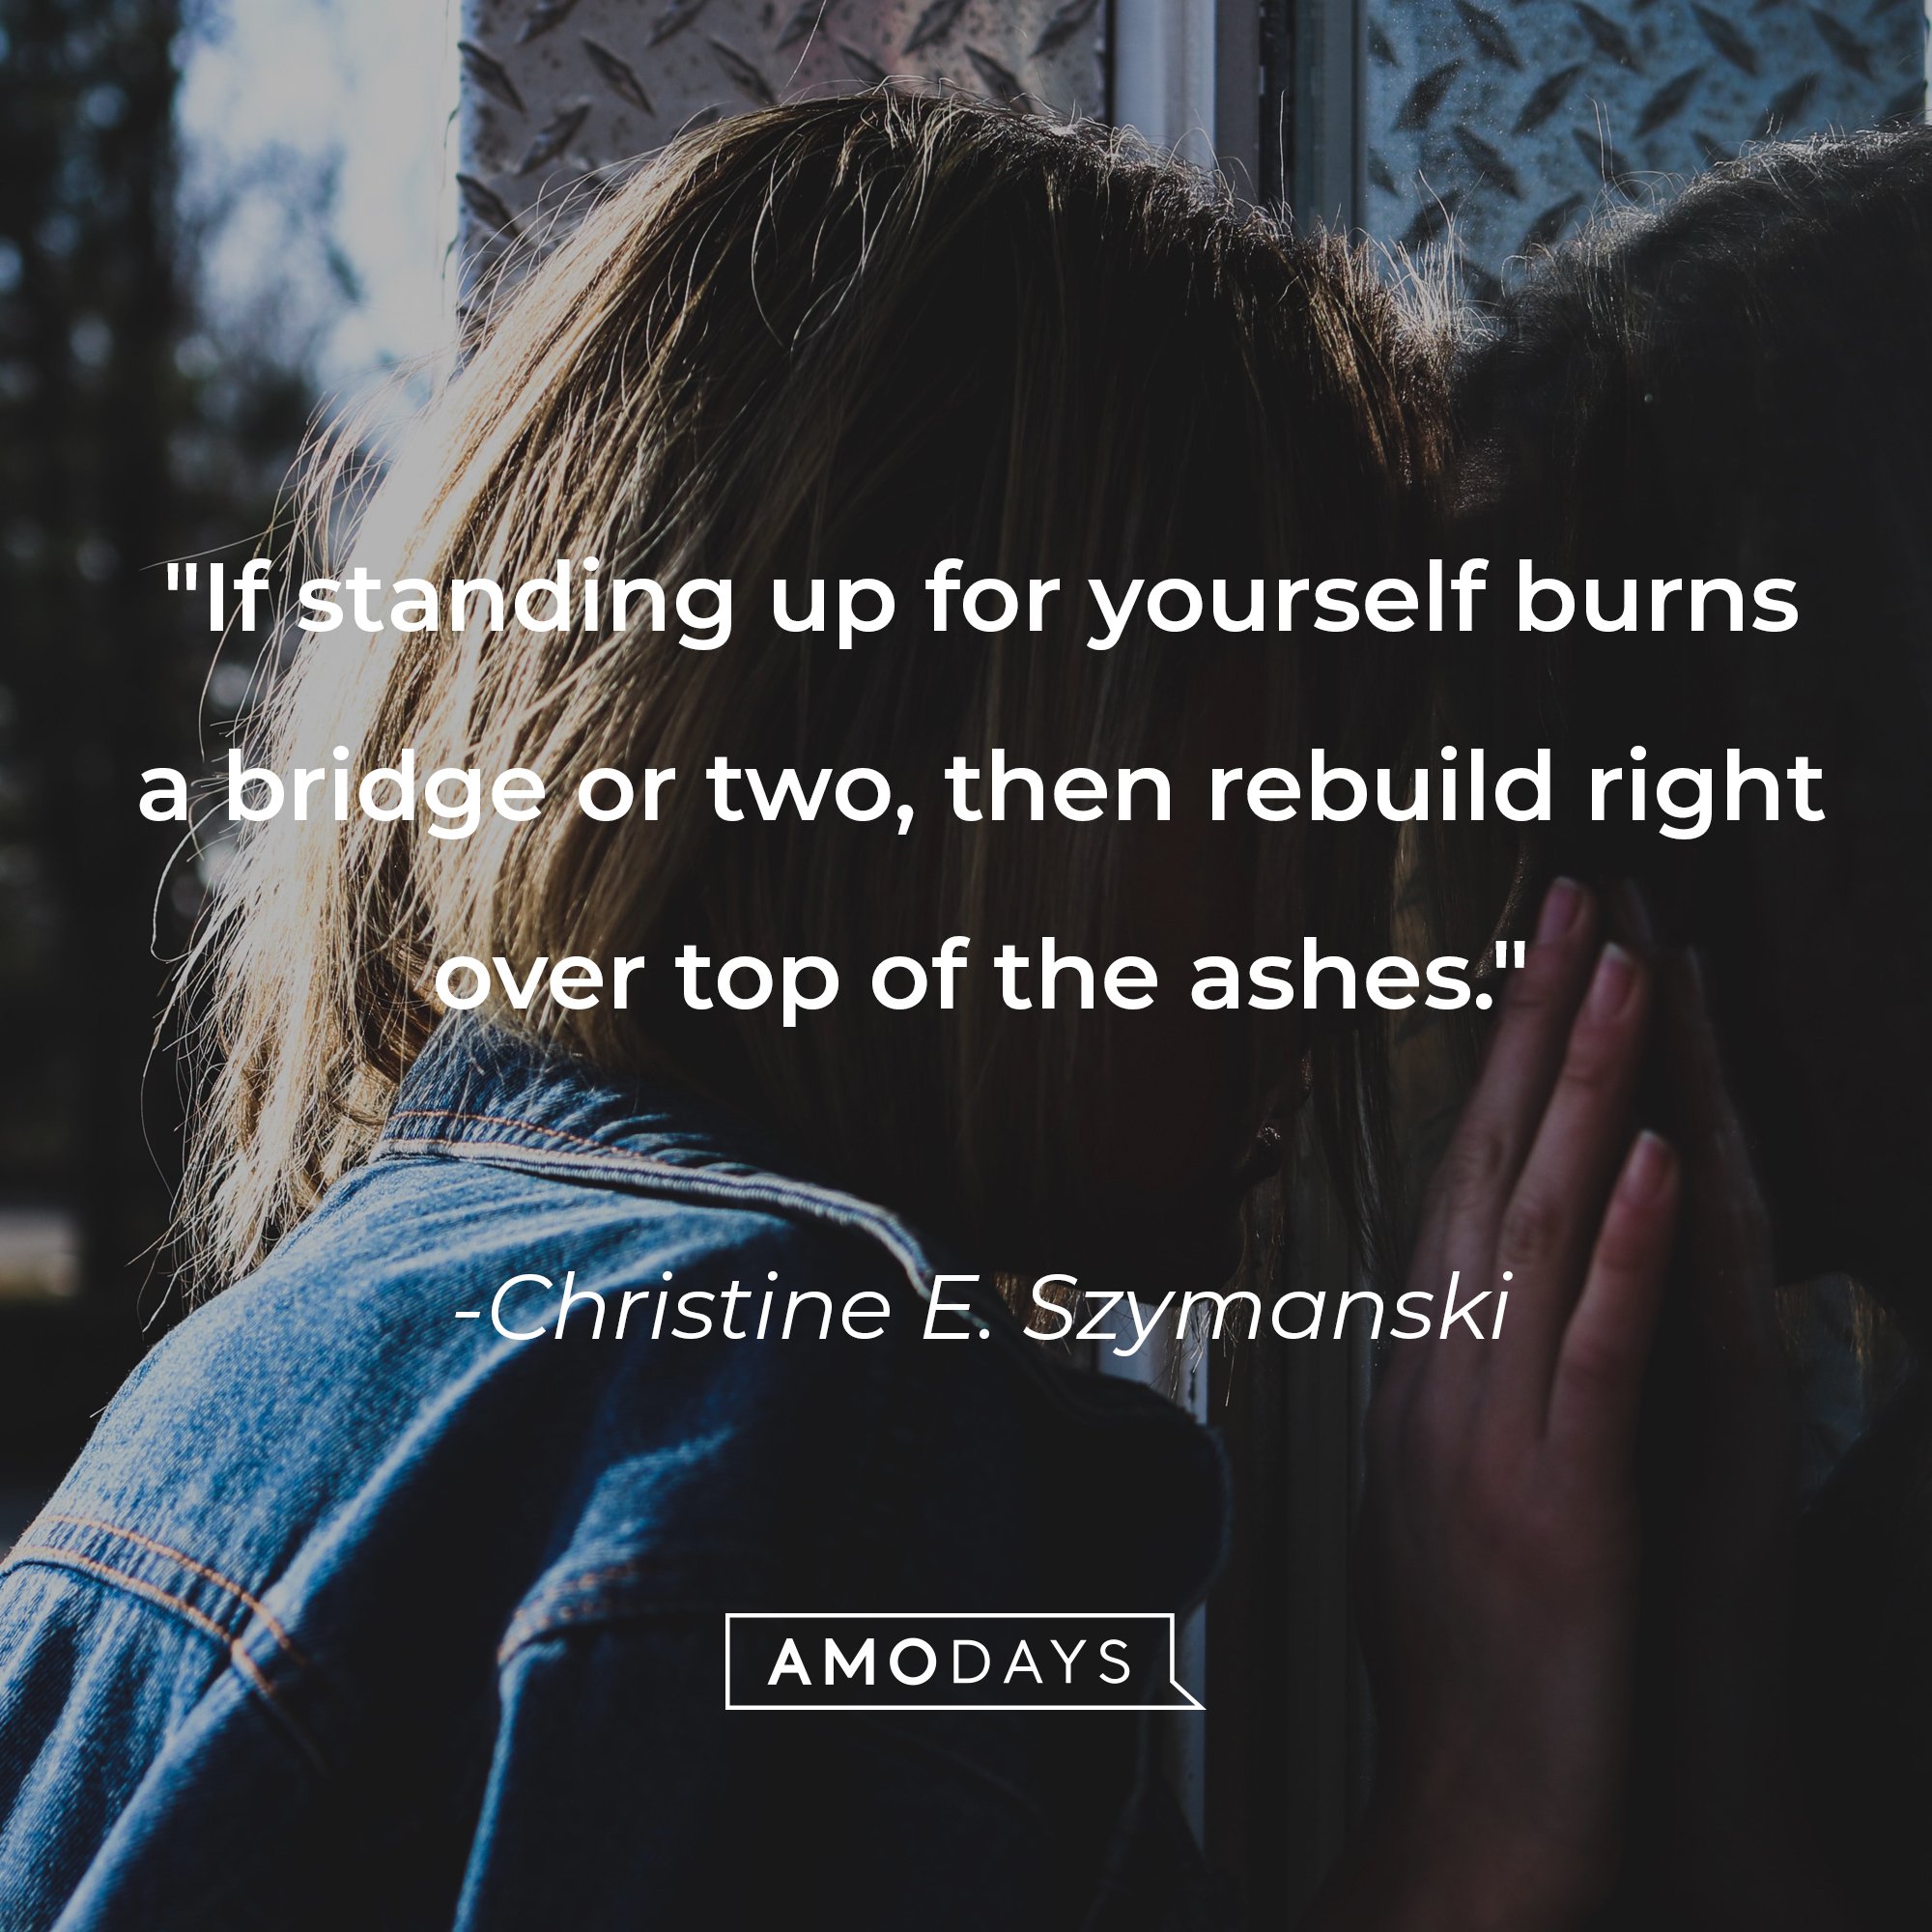 Christine E. Szymanski's quote: "If standing up for yourself burns a bridge or two, then rebuild right over top of the ashes." | Image: AmoDays